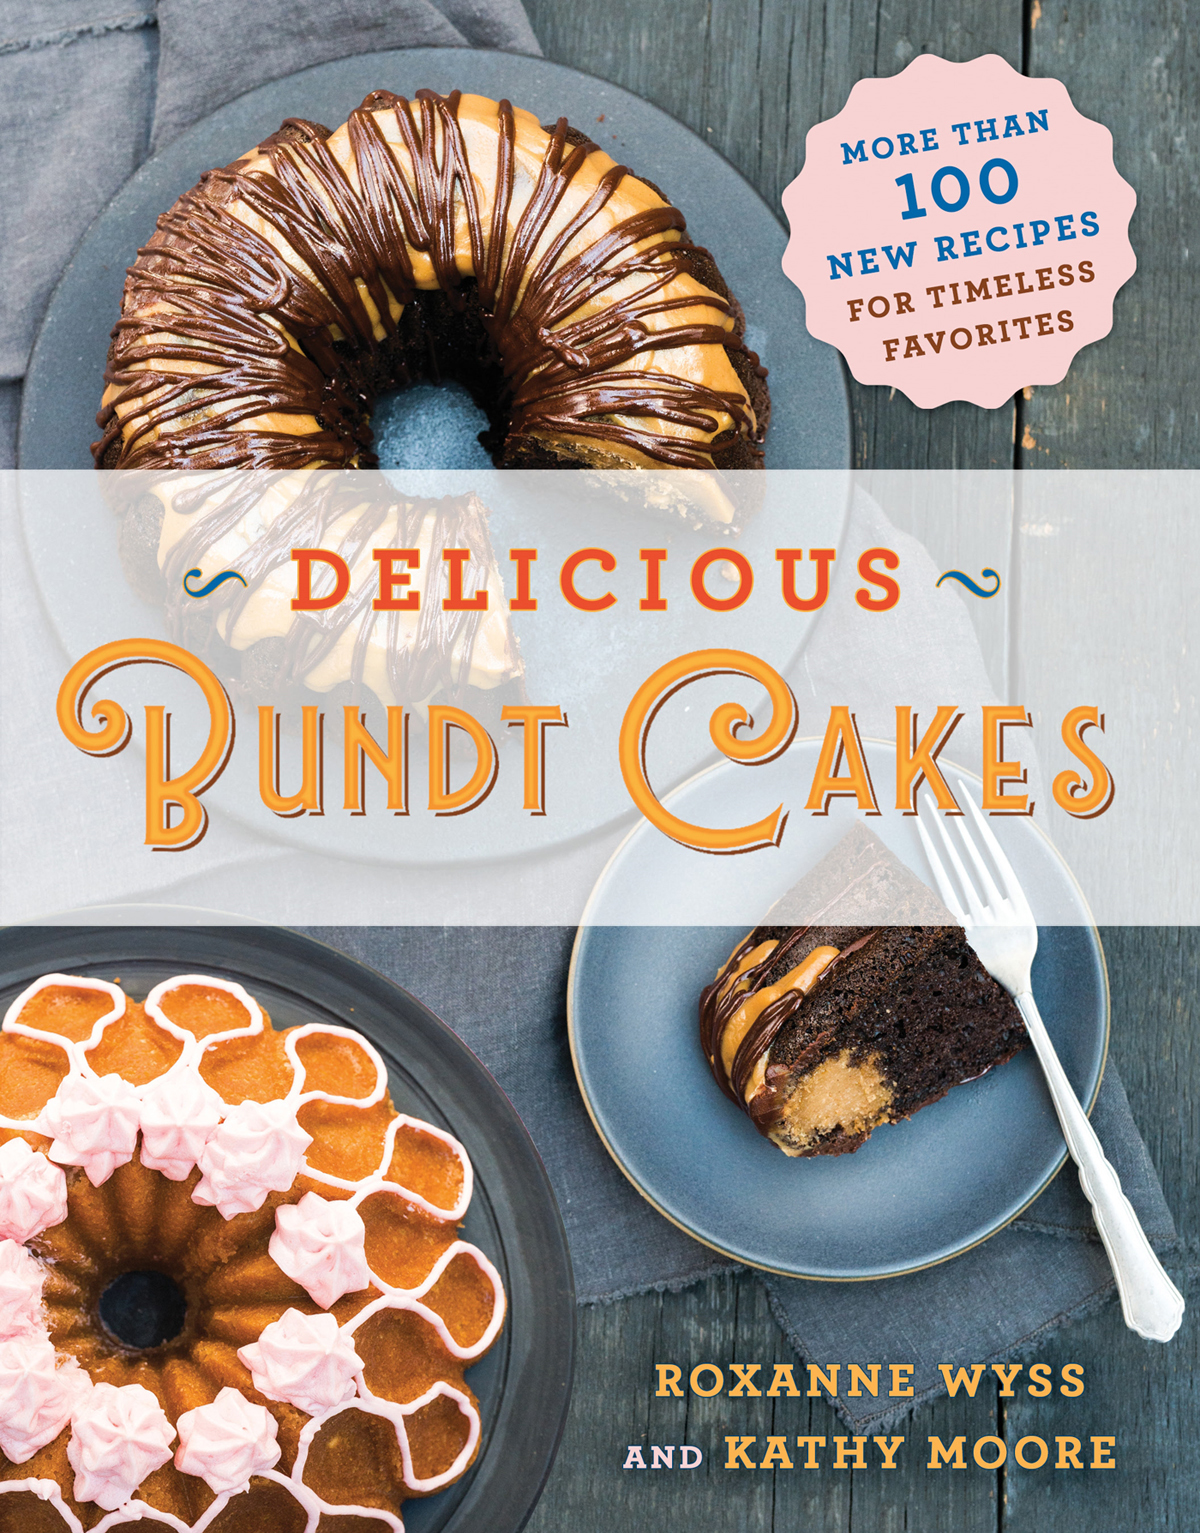 Delicious Bundt Cakes More Than 100 New Recipes for Timeless Favorites - photo 1